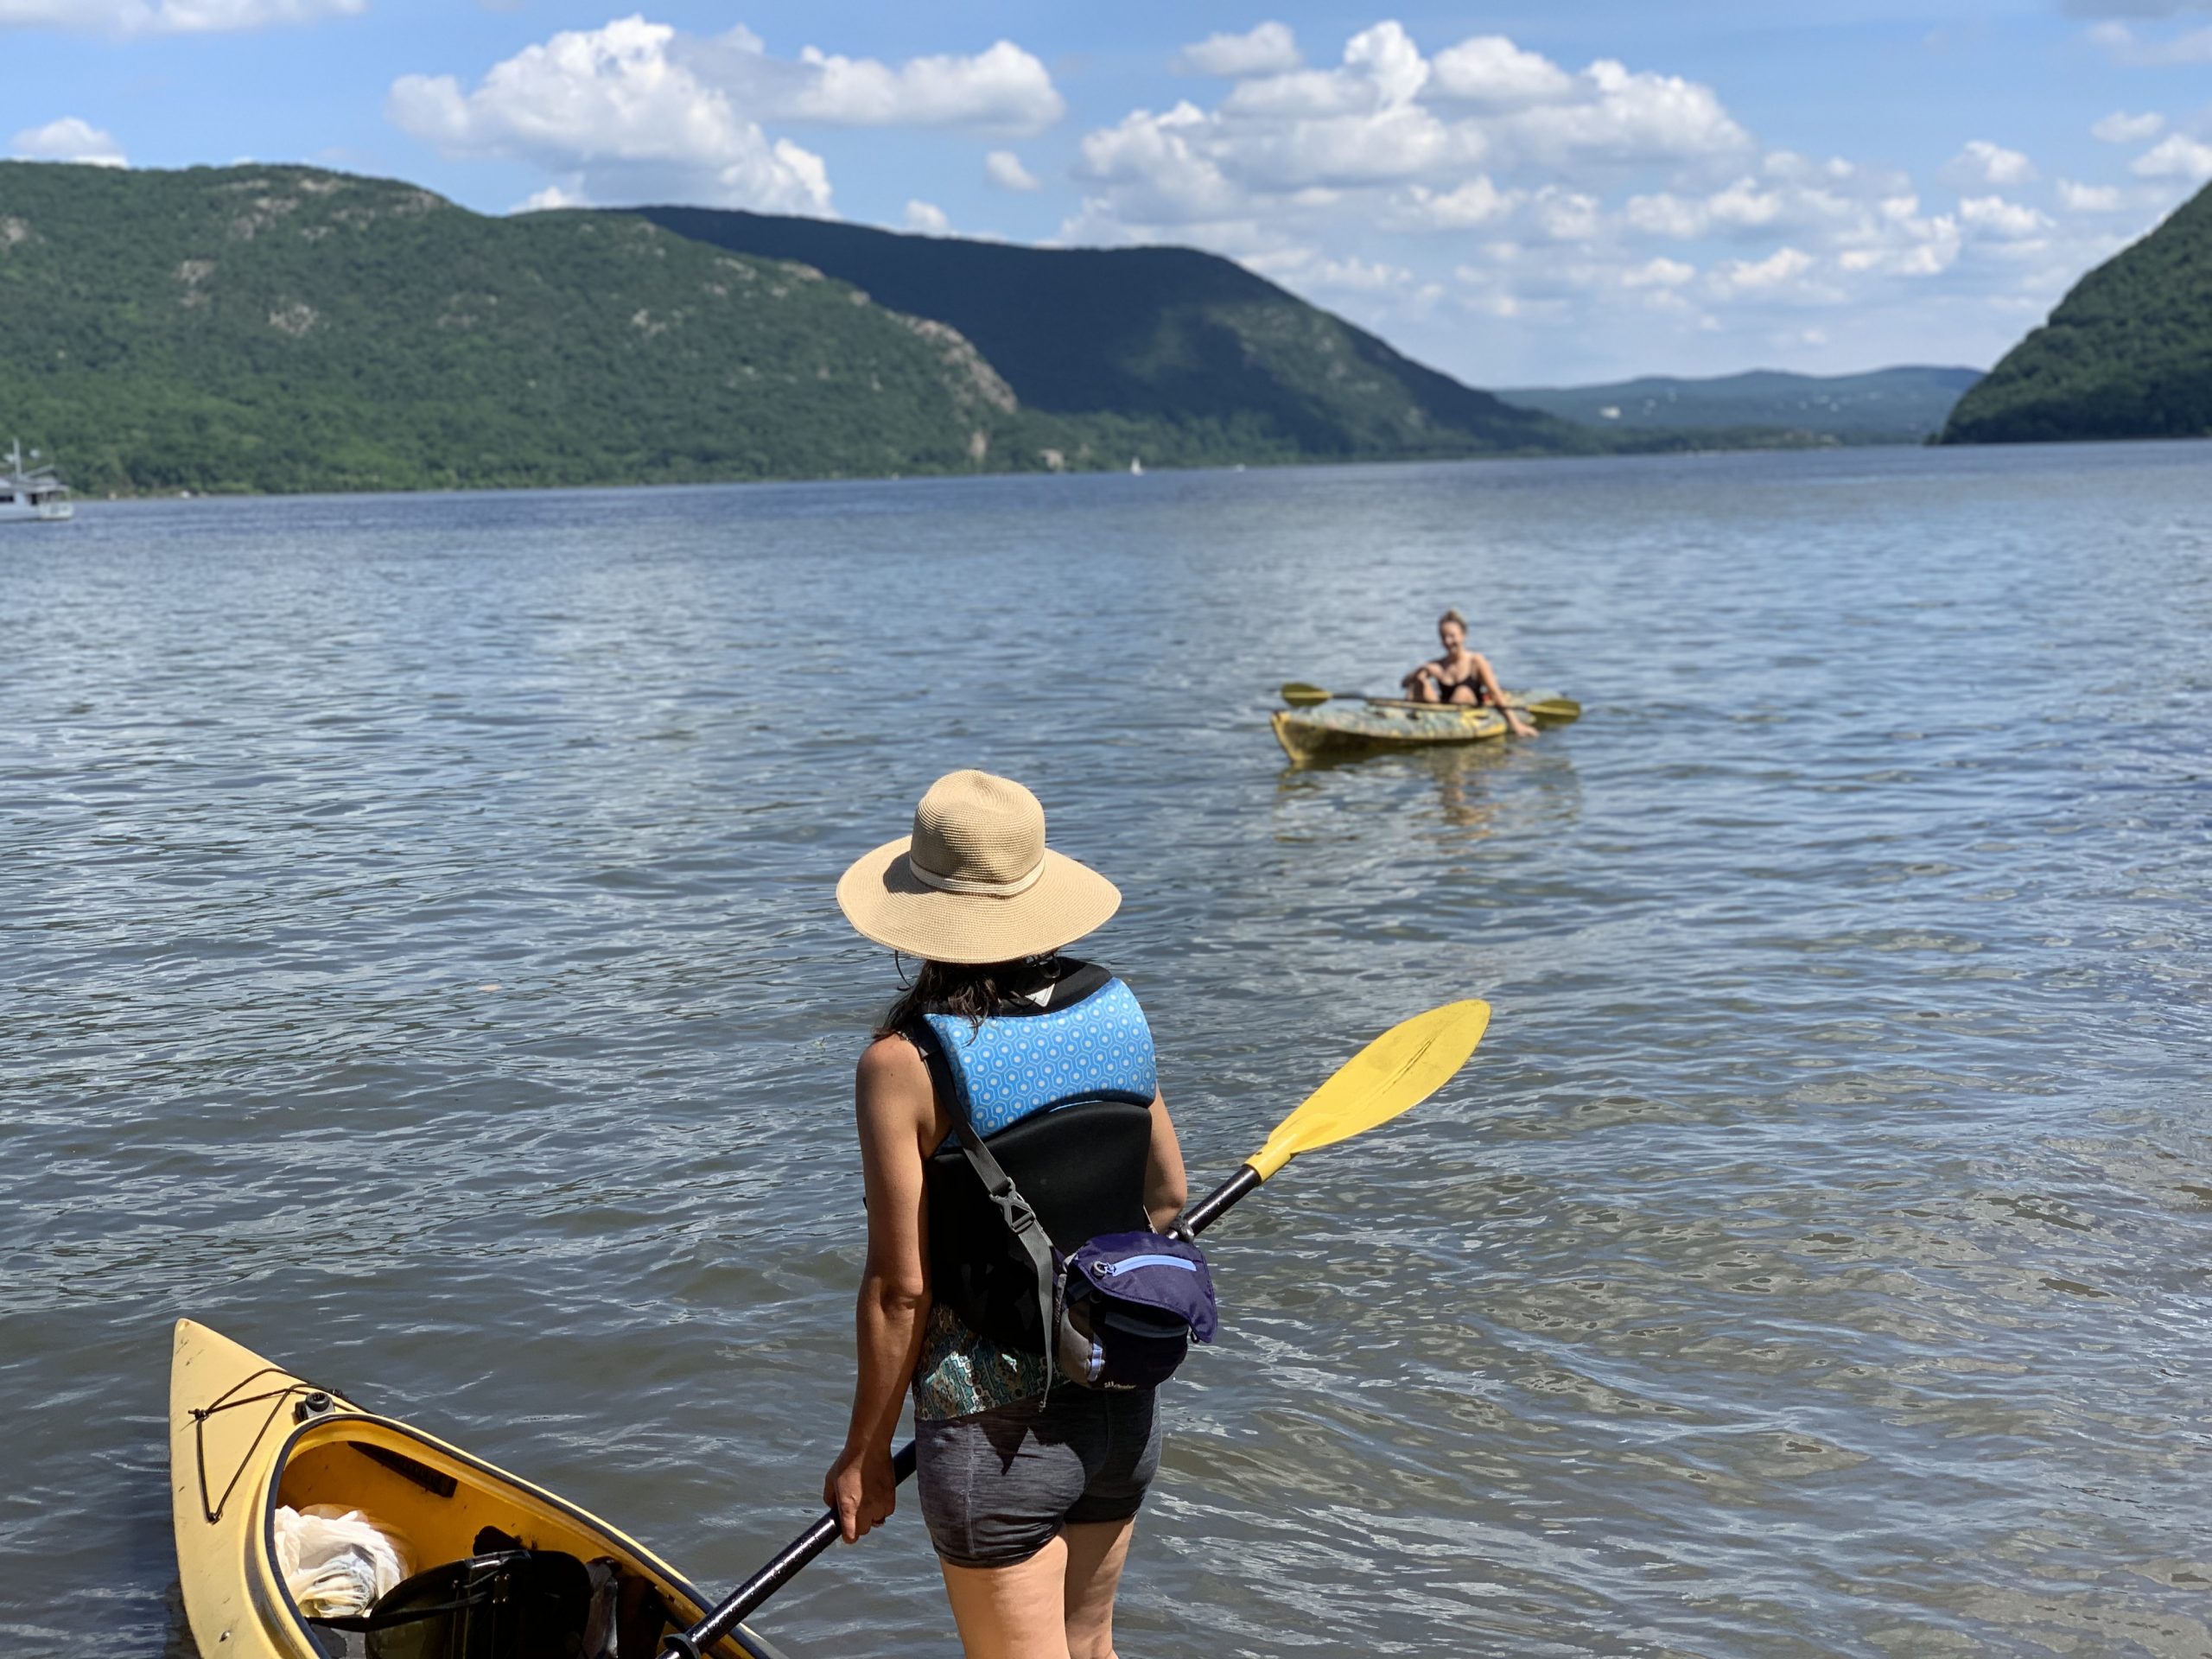 Kayaking Cornwall On Hudson with Family